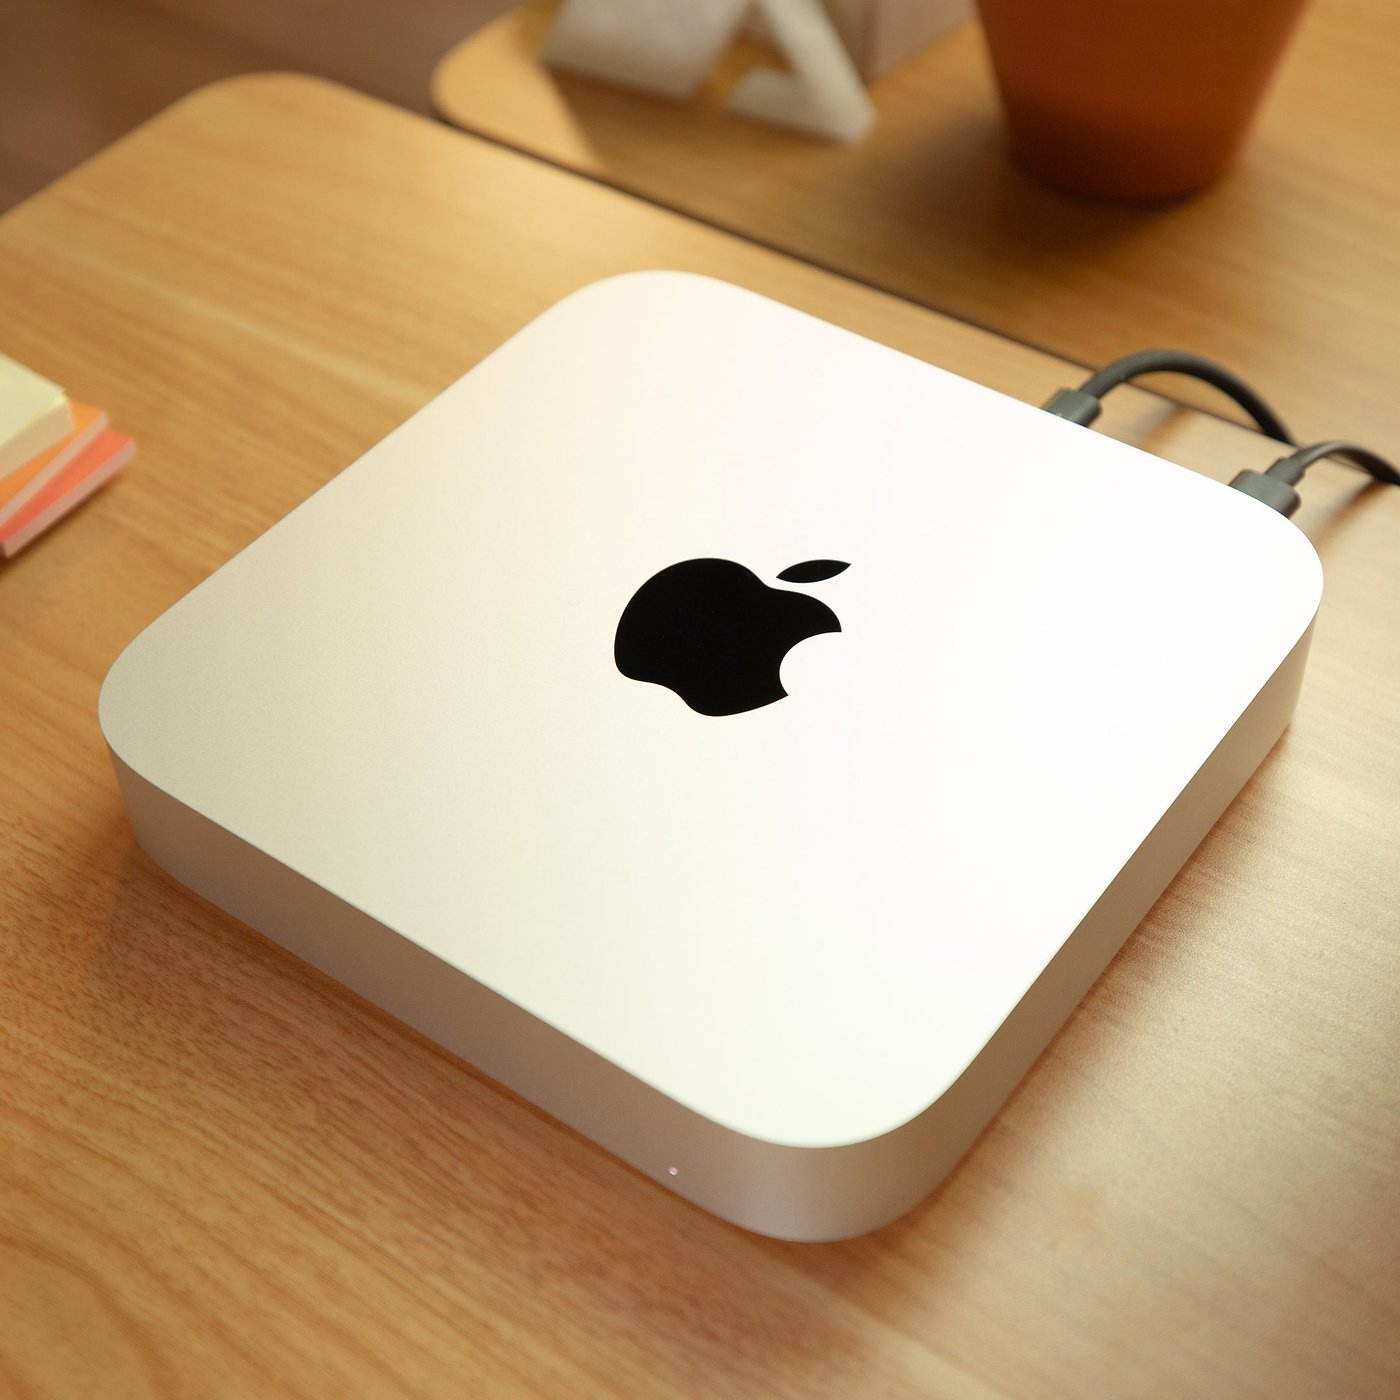 Apple Mac Mini with M3 Chip Expected Fall Launch